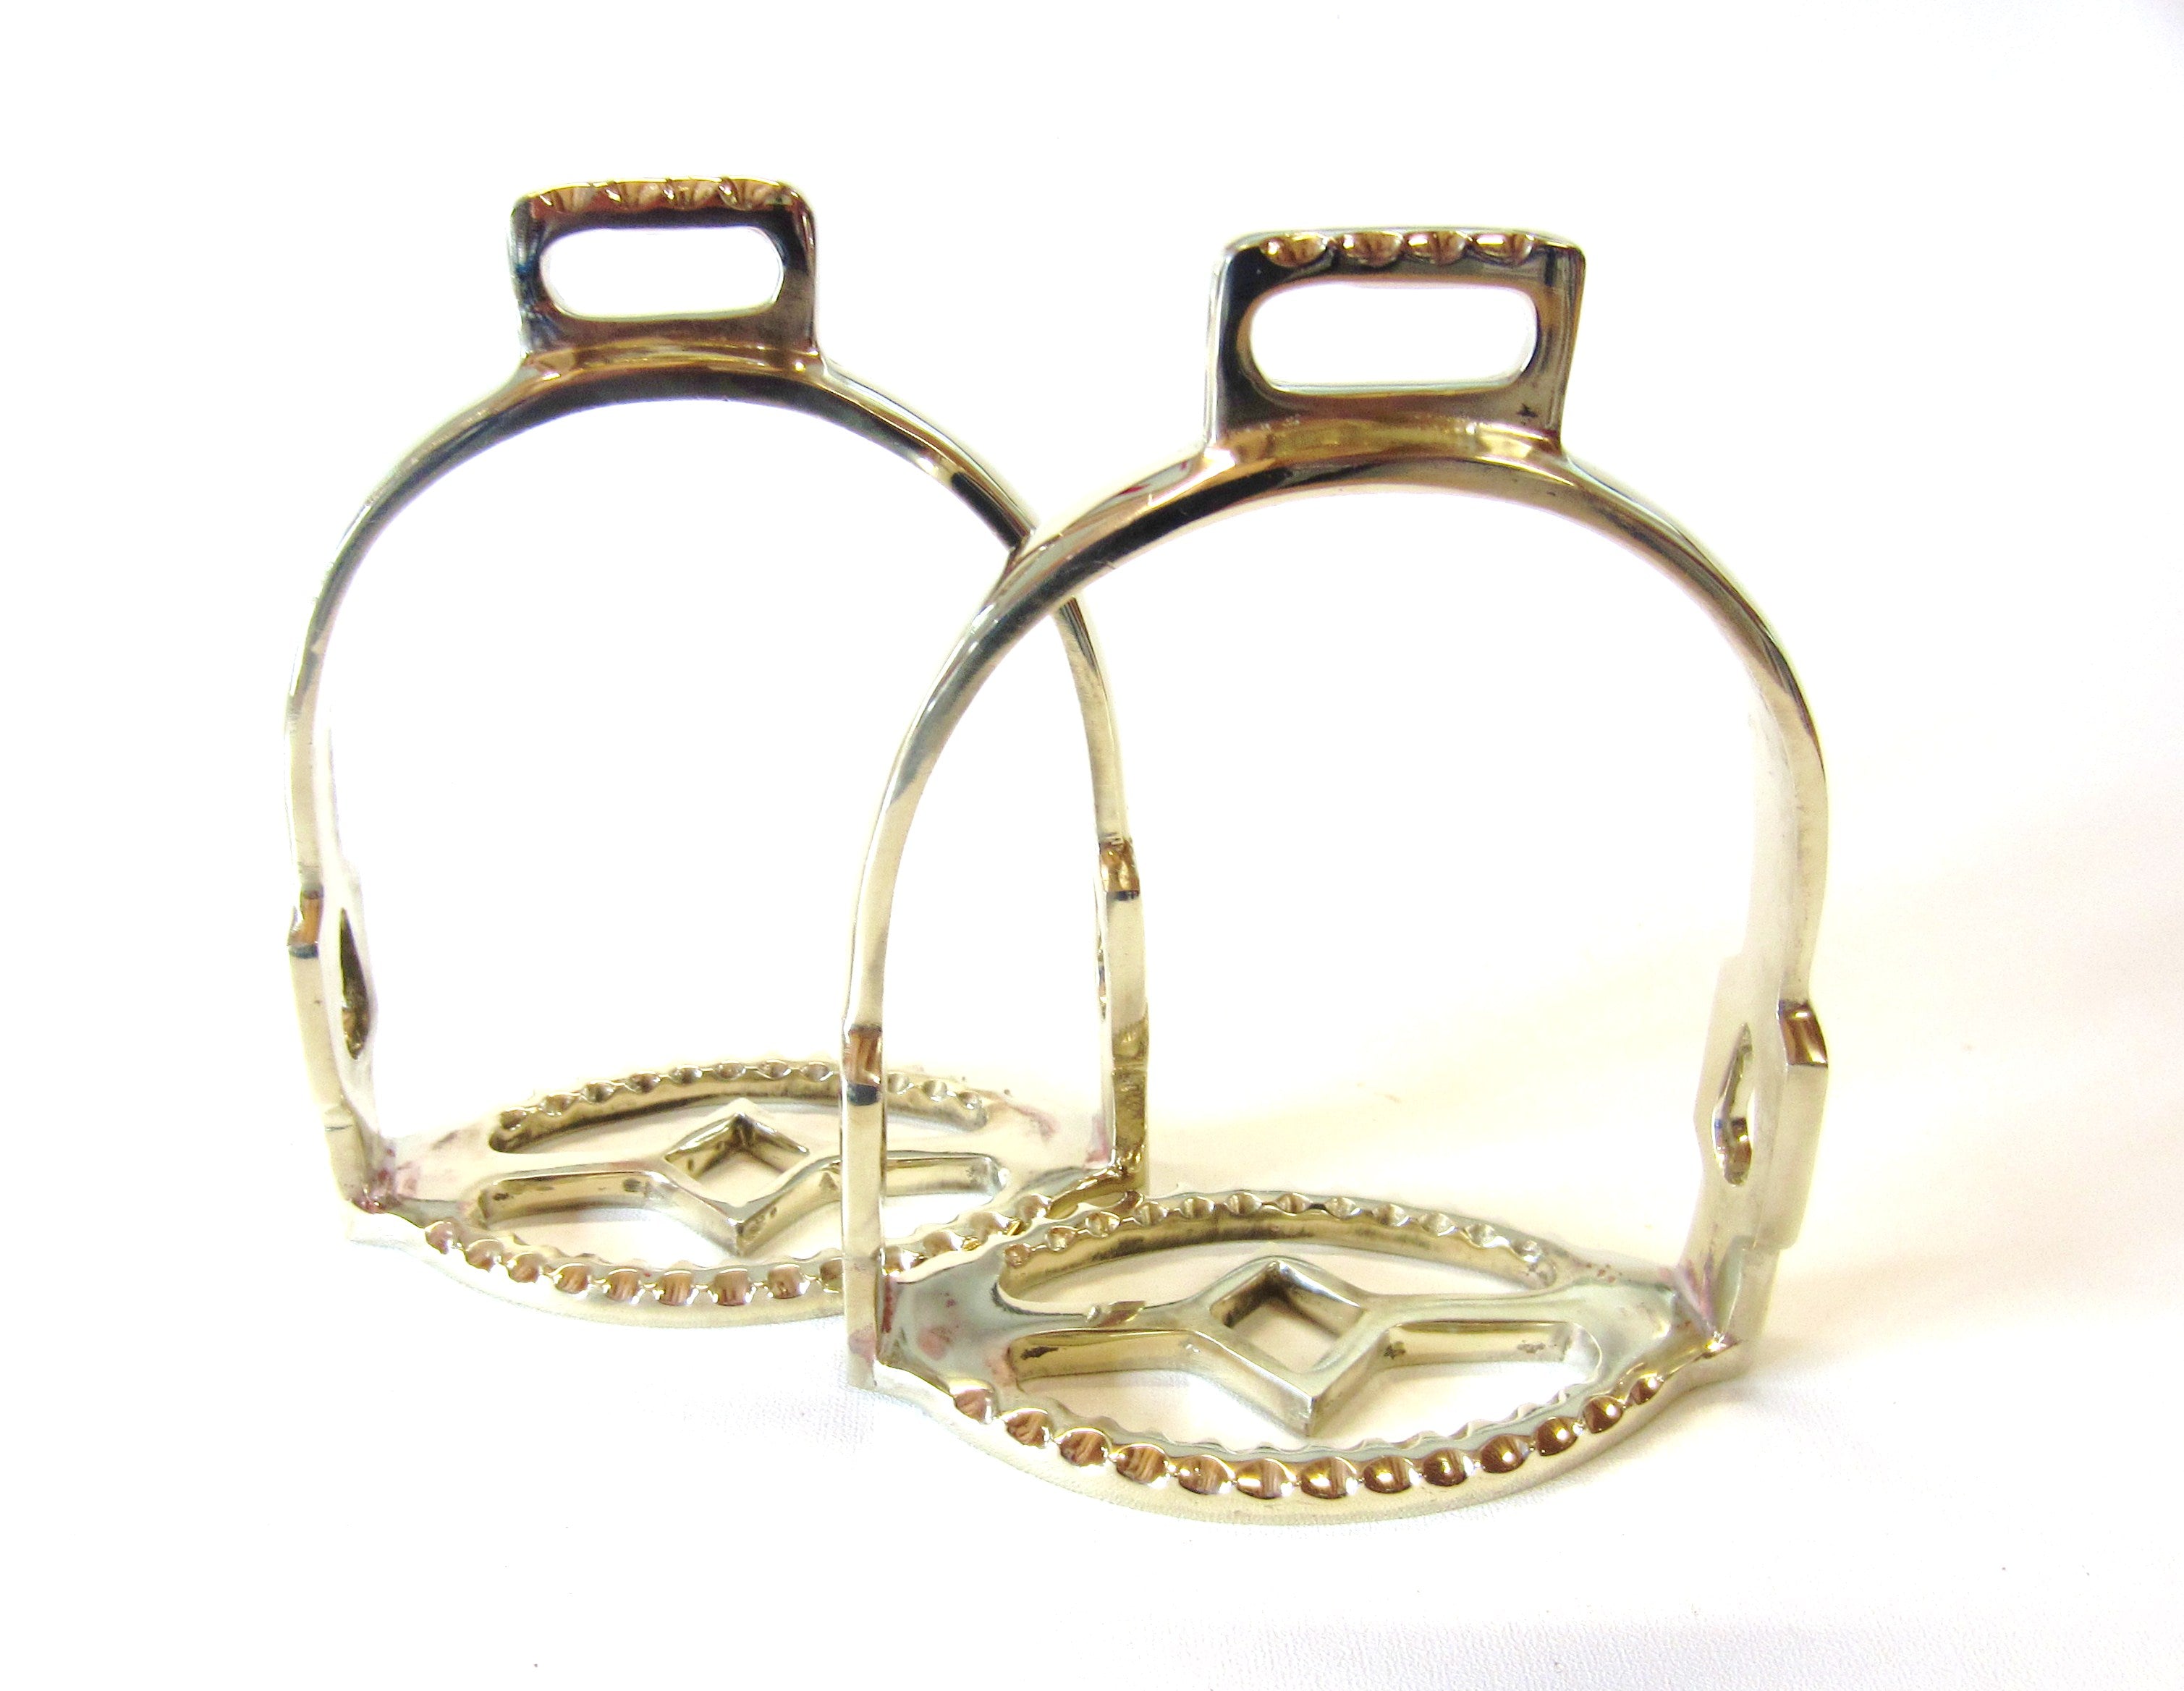 Noble Spanish baroque stirrup brass - gold colored